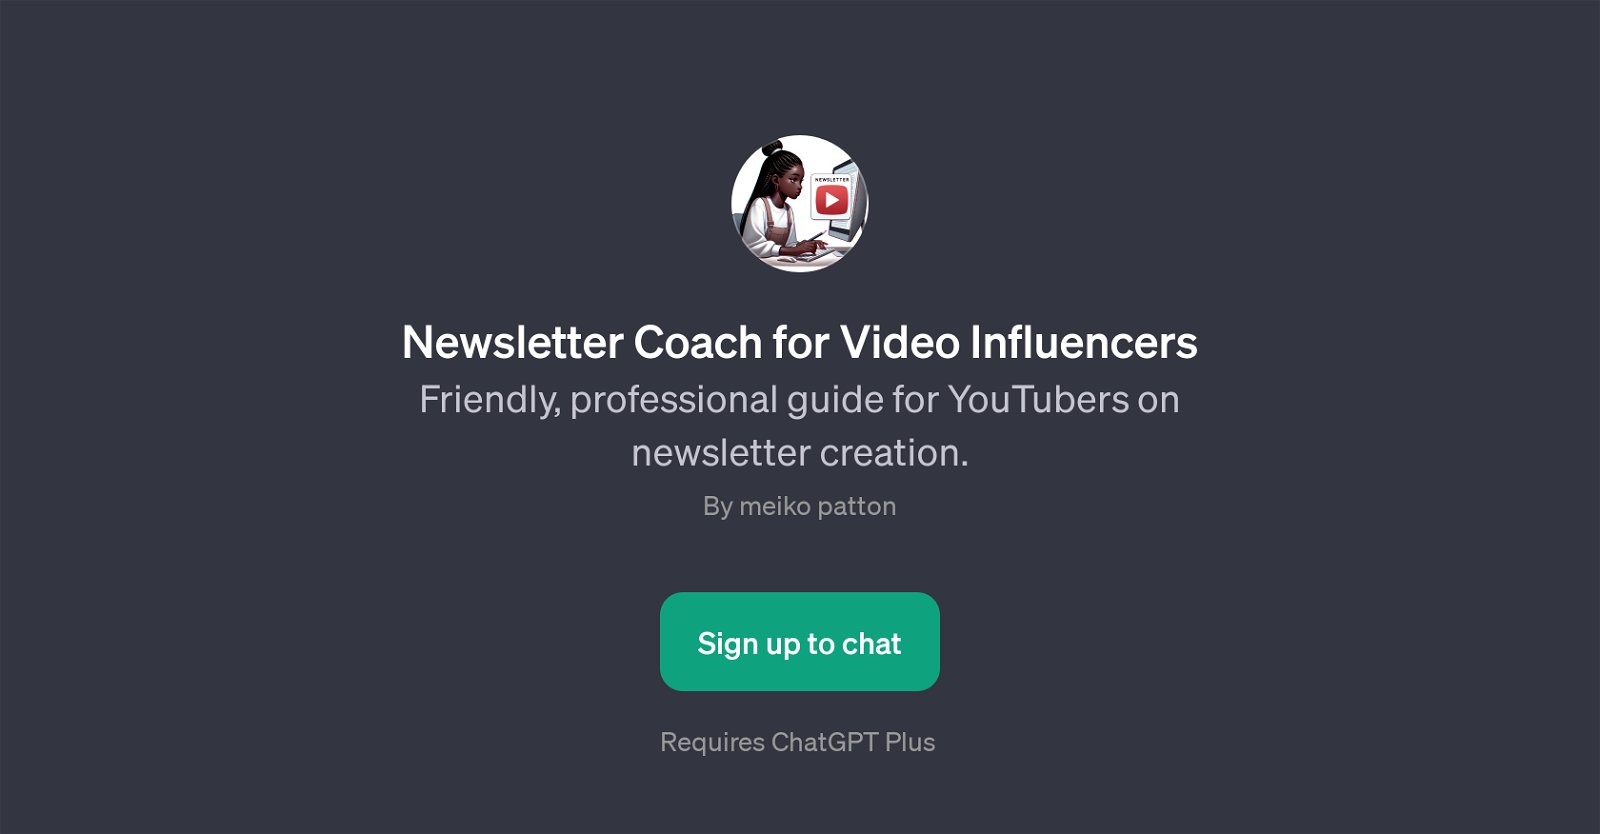 Newsletter Coach for Video Influencers website